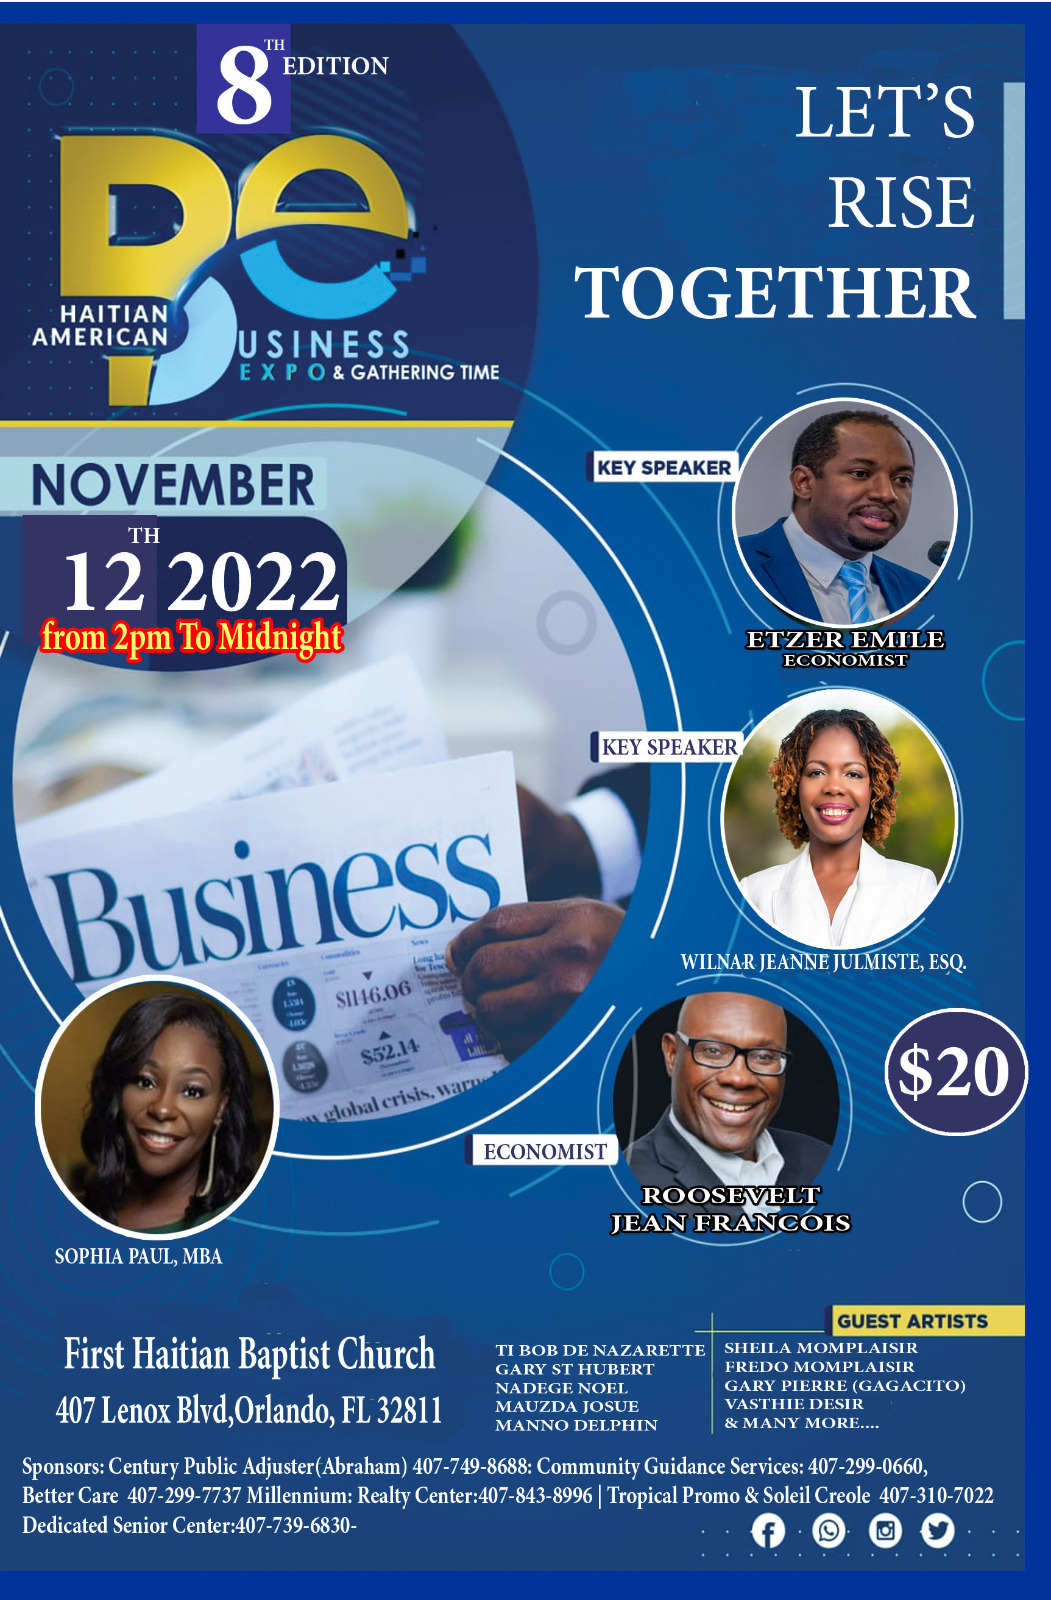 Haitian American Business Expo & Gathering Time (HABEG 2022)